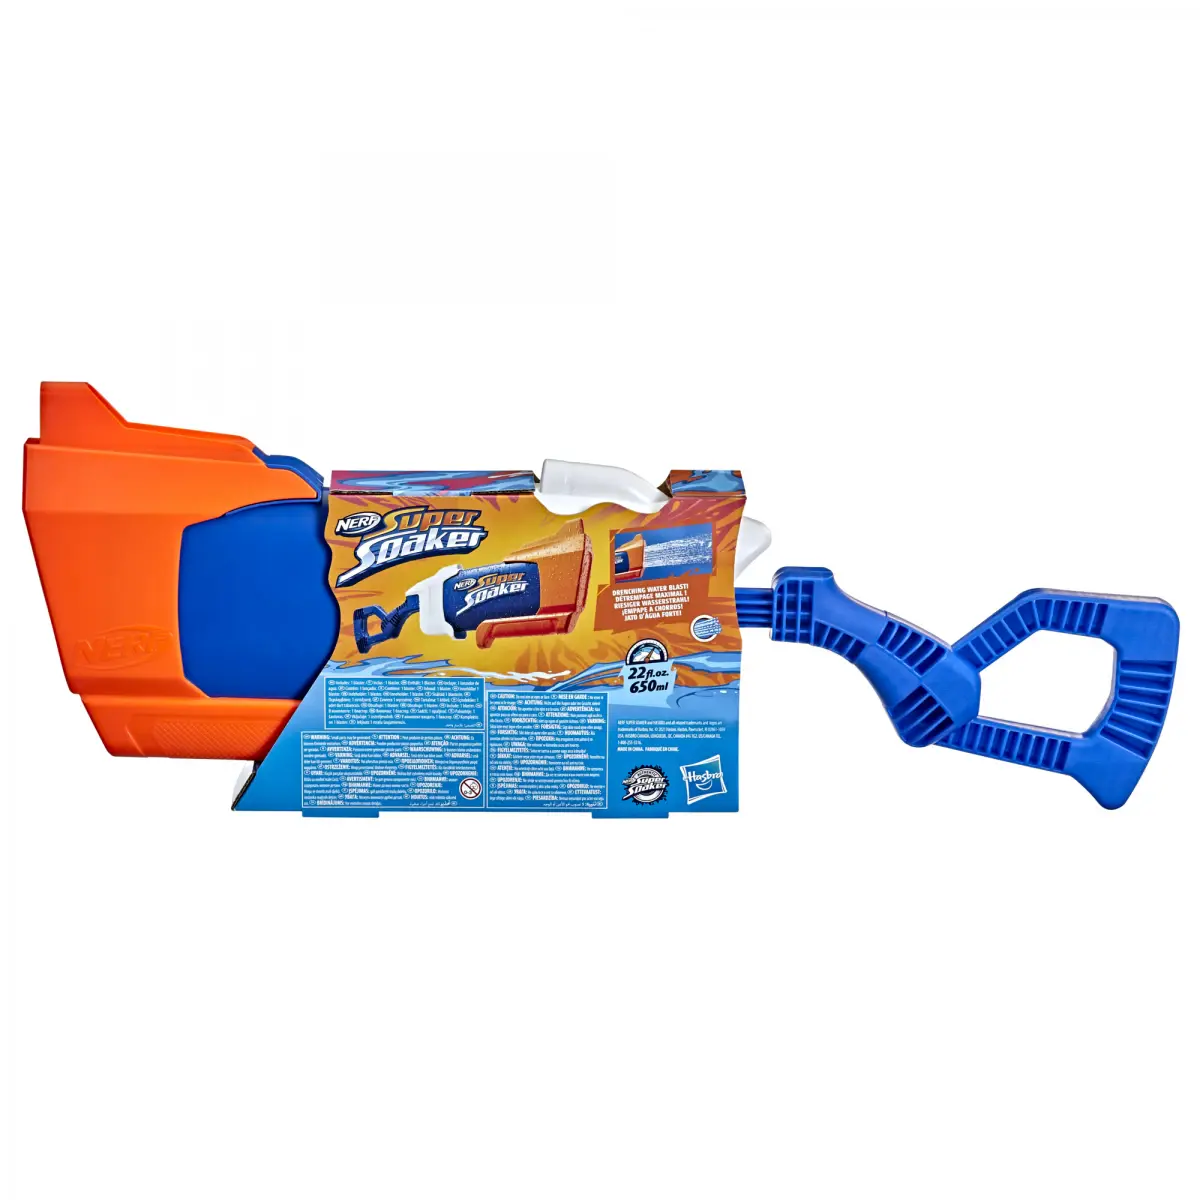 Nerf Super Soaker Rainstorm Water Blaster, Drenching Water Blast, Outdoor Water Blasting Fun, Easy Fill and Blast for 6Y+